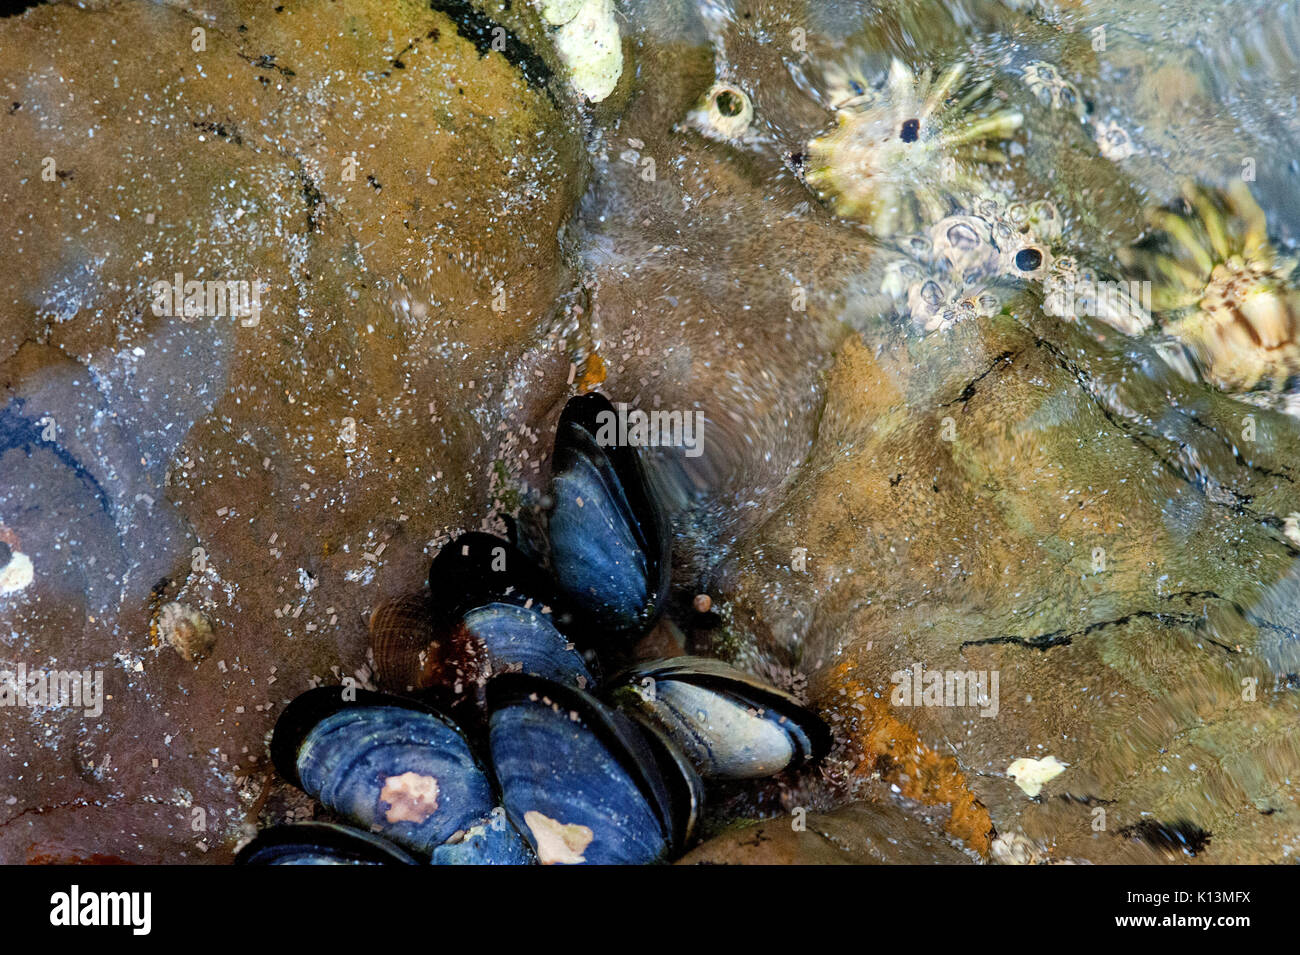 A close up view of rocks, mussels and marine life below the surface of a rock pool at Polzeath Bay, Cornwall, England. Stock Photo